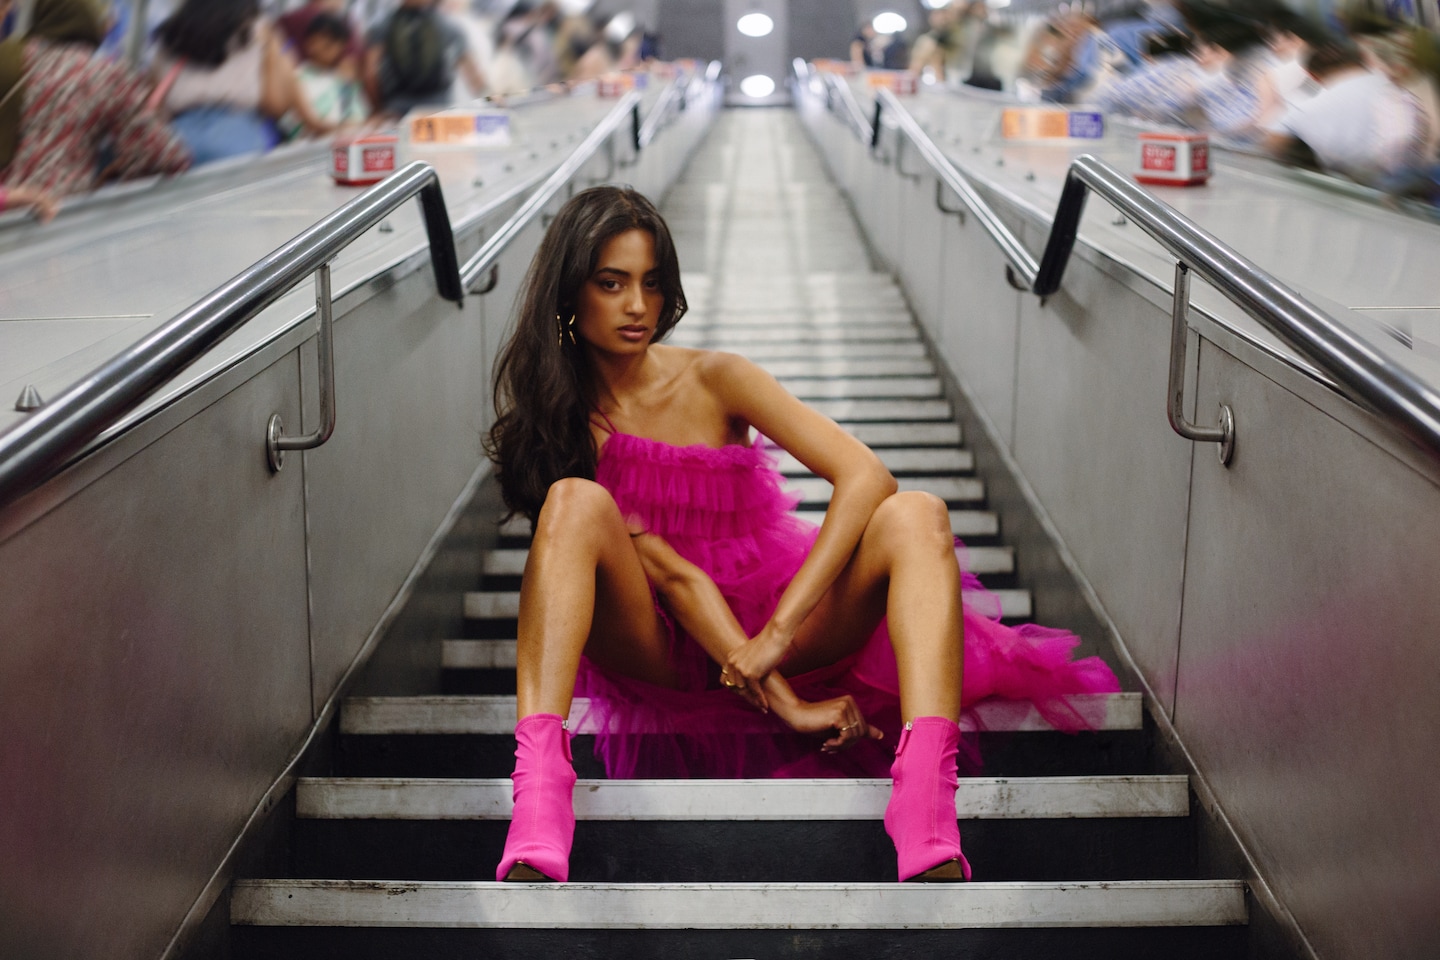 The Tube Girl is selling confidence — and her audience is lining up